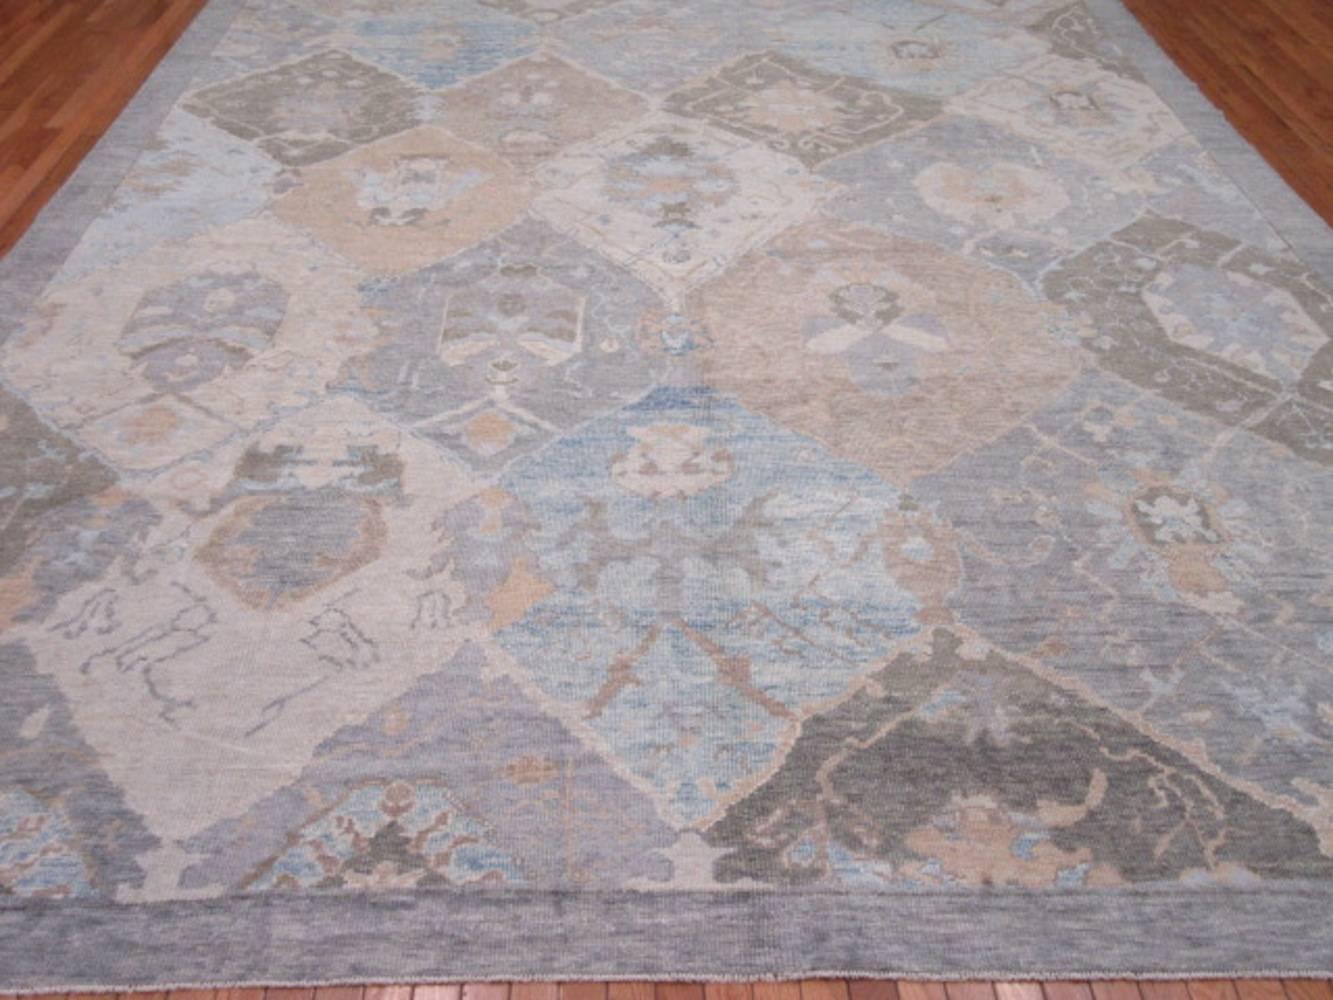 His is a large new hand-knotted wool rug from Turkey woven in the panel Oushak design. It is a well constructed rug with primary colors of ivory, grey, blue and terracotta red. Its transitional design makes it an easy rug to work with for any room